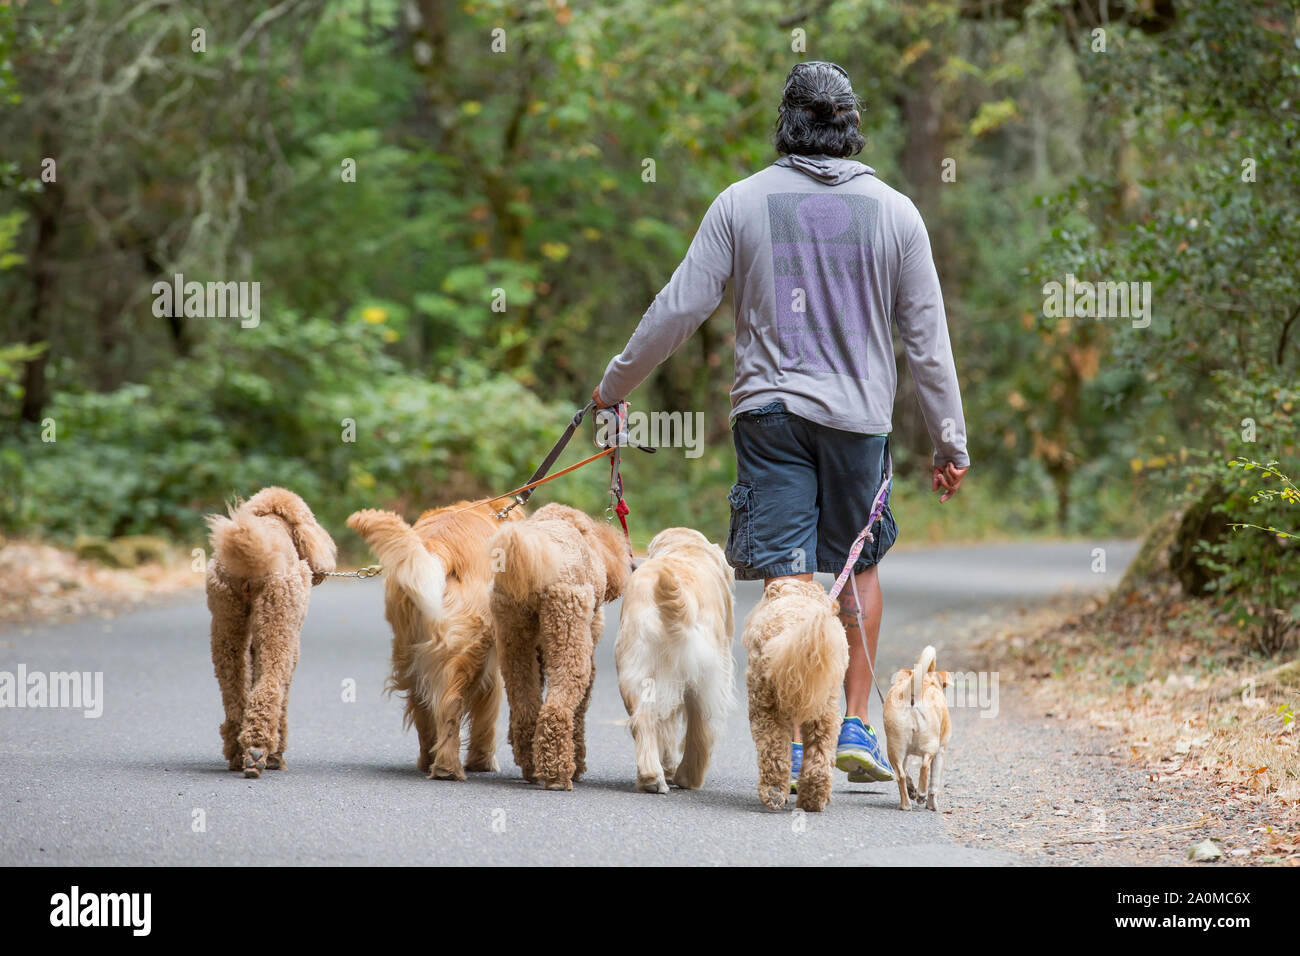 Professional dog trainer and walker Juan Carlos Zuniga walking poodles, Golden Retrievers, and Chihuahua in a park (seen from behind). Stock Photo